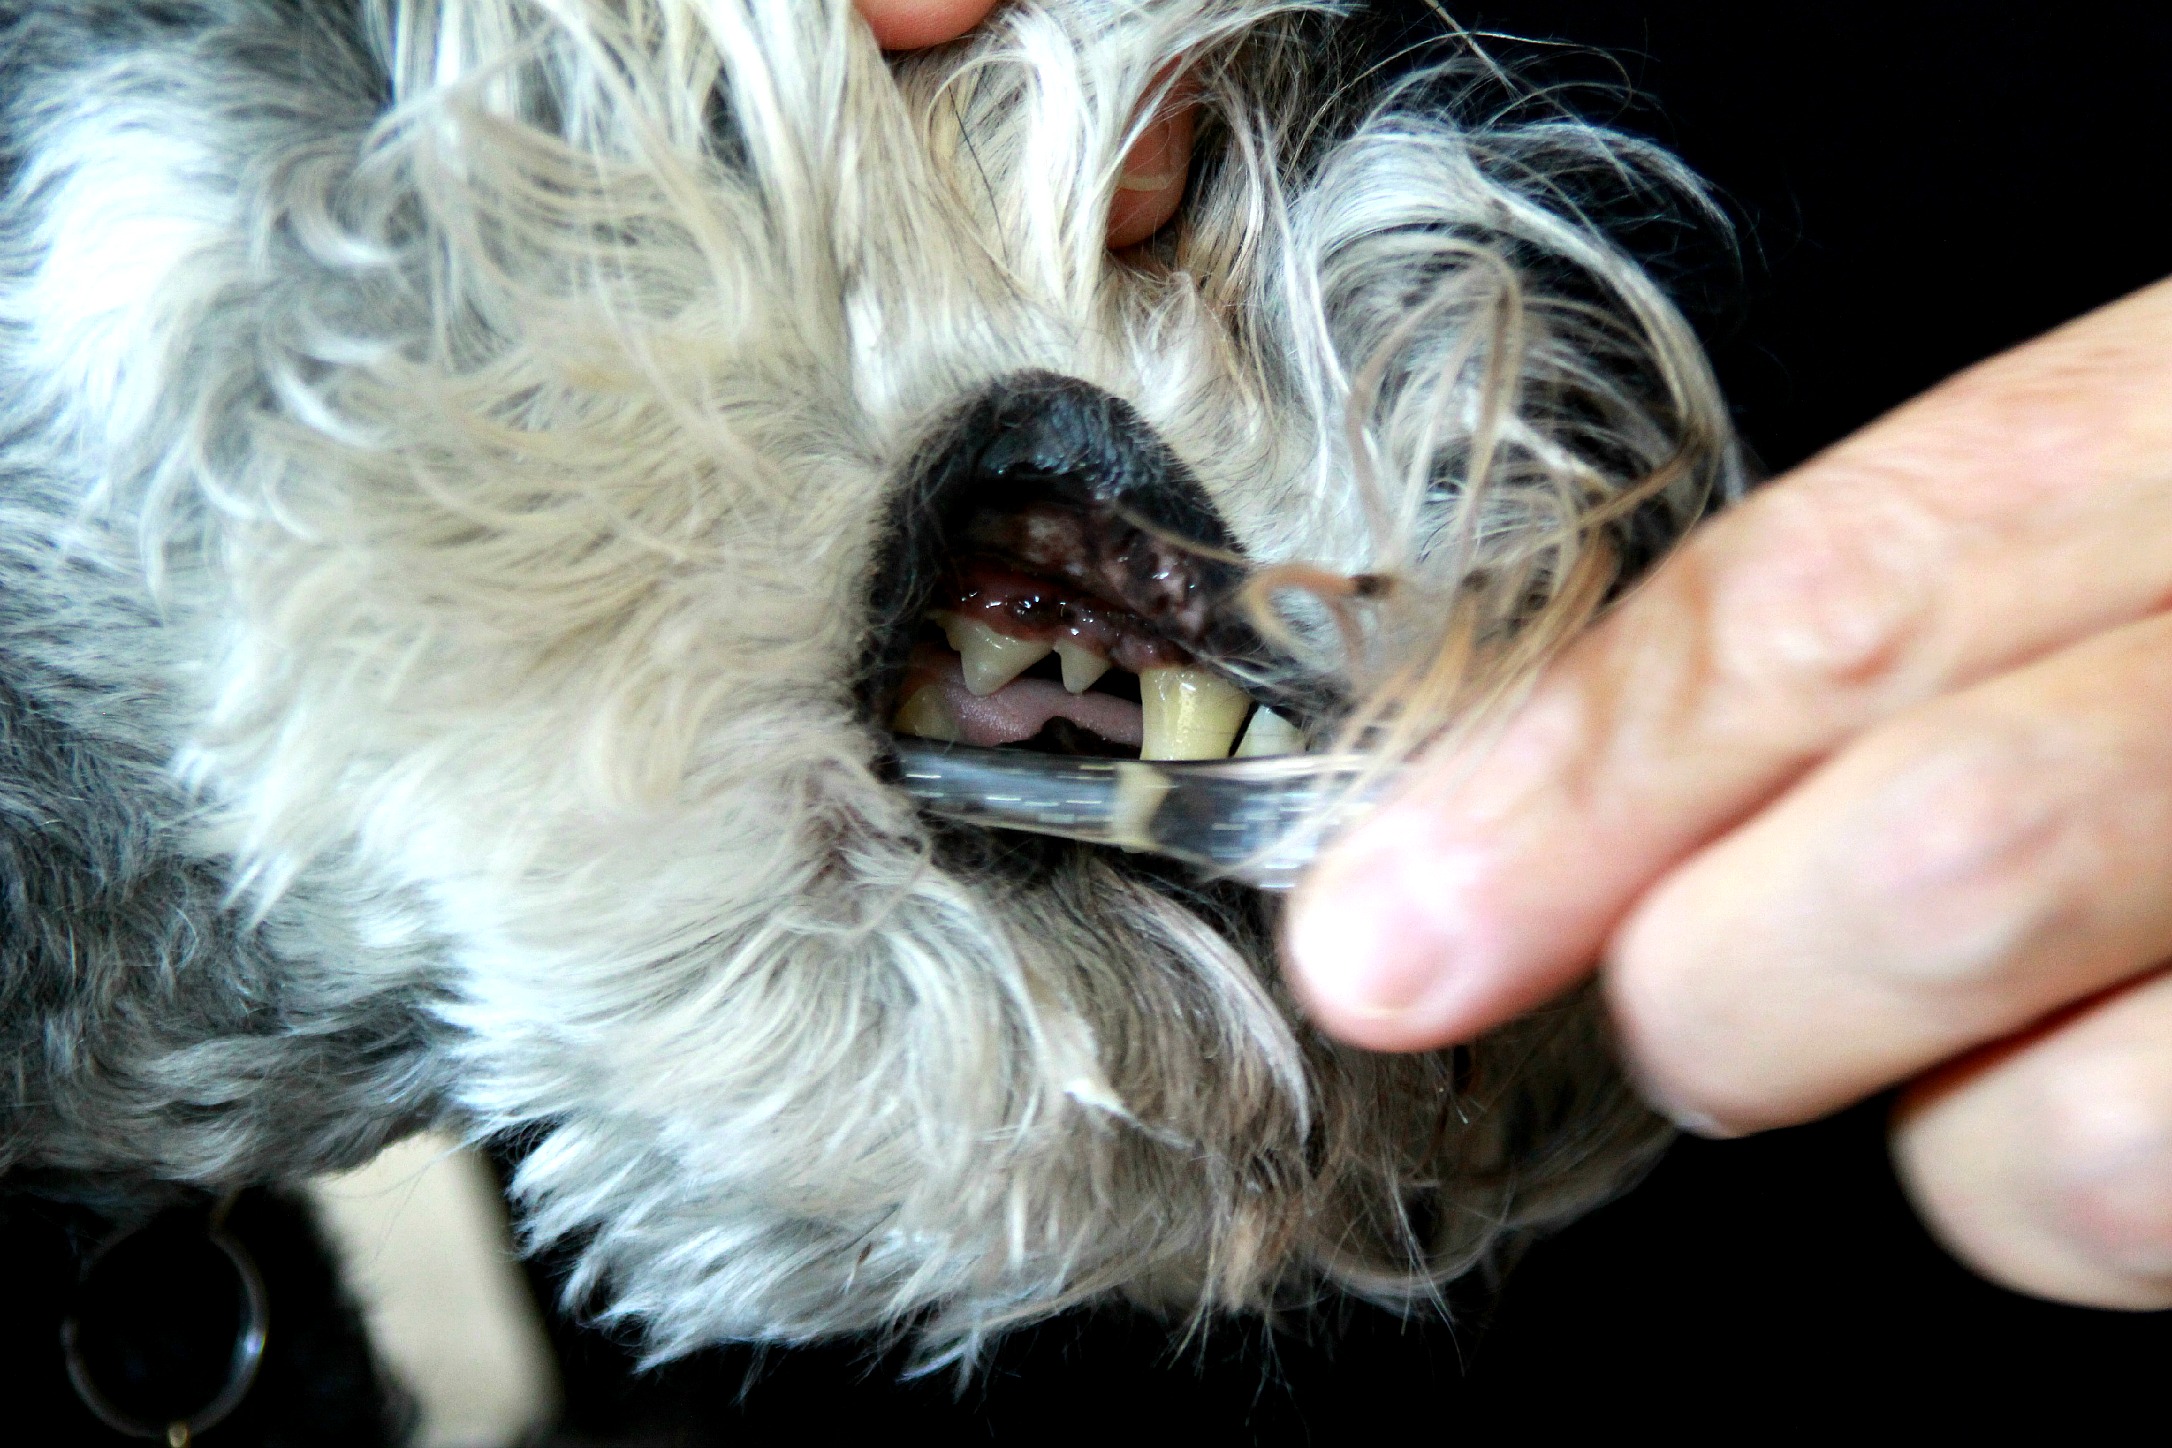 After two costly dental cleanings at the veterinarian, I learned to clean my dog's teeth. Much easier than I thought.